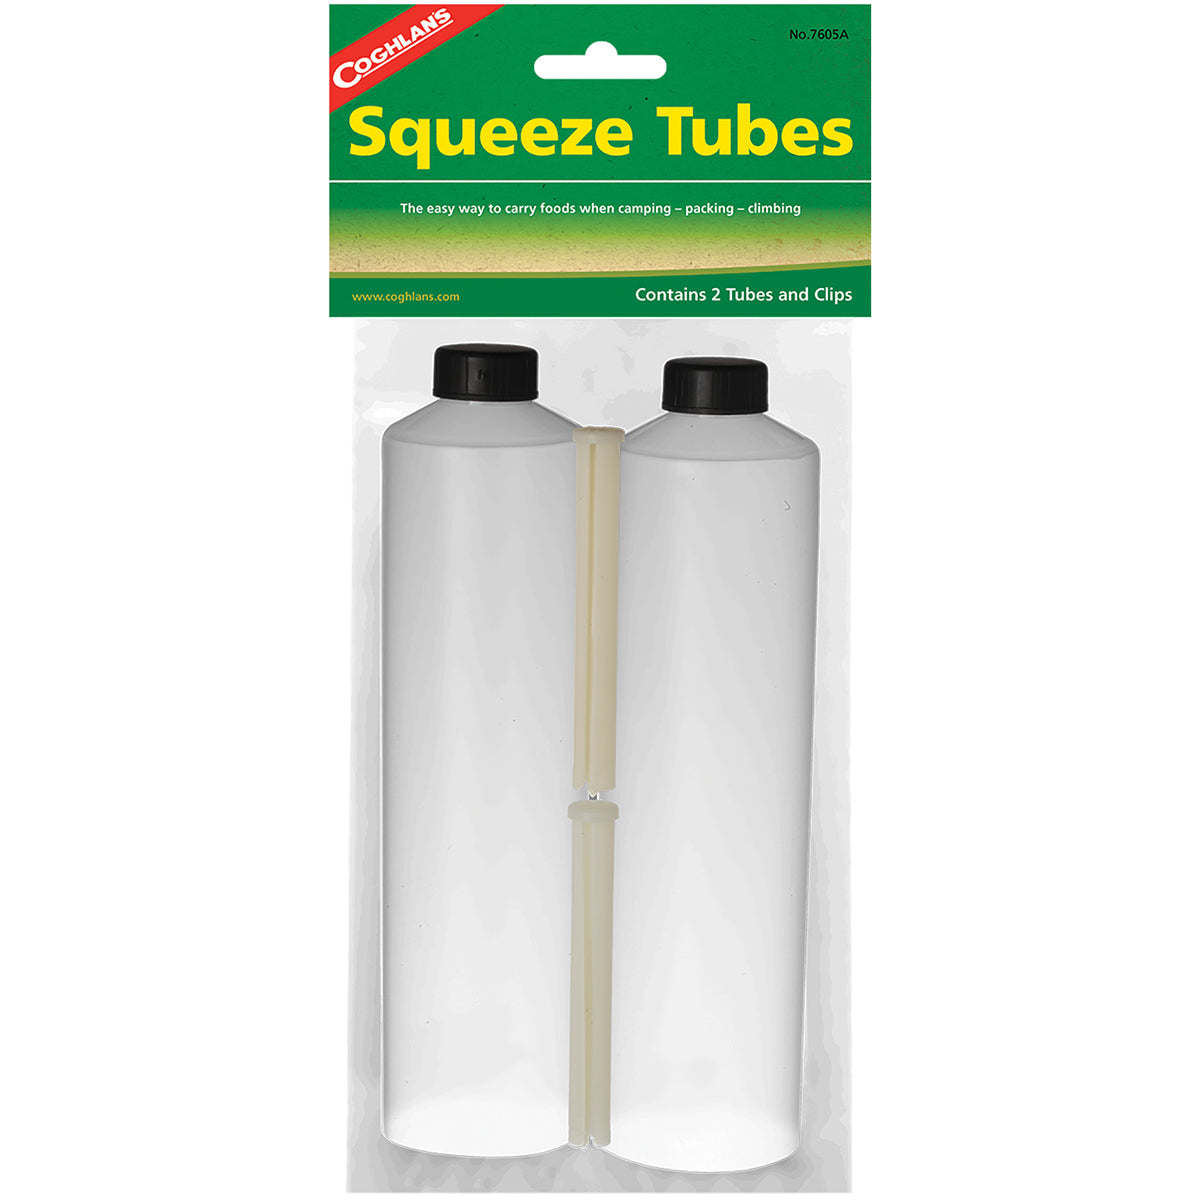 Coghlan's Squeeze Tubes (2 Pack) Camping Reusable Plastic Food Storage Container Coghlan's